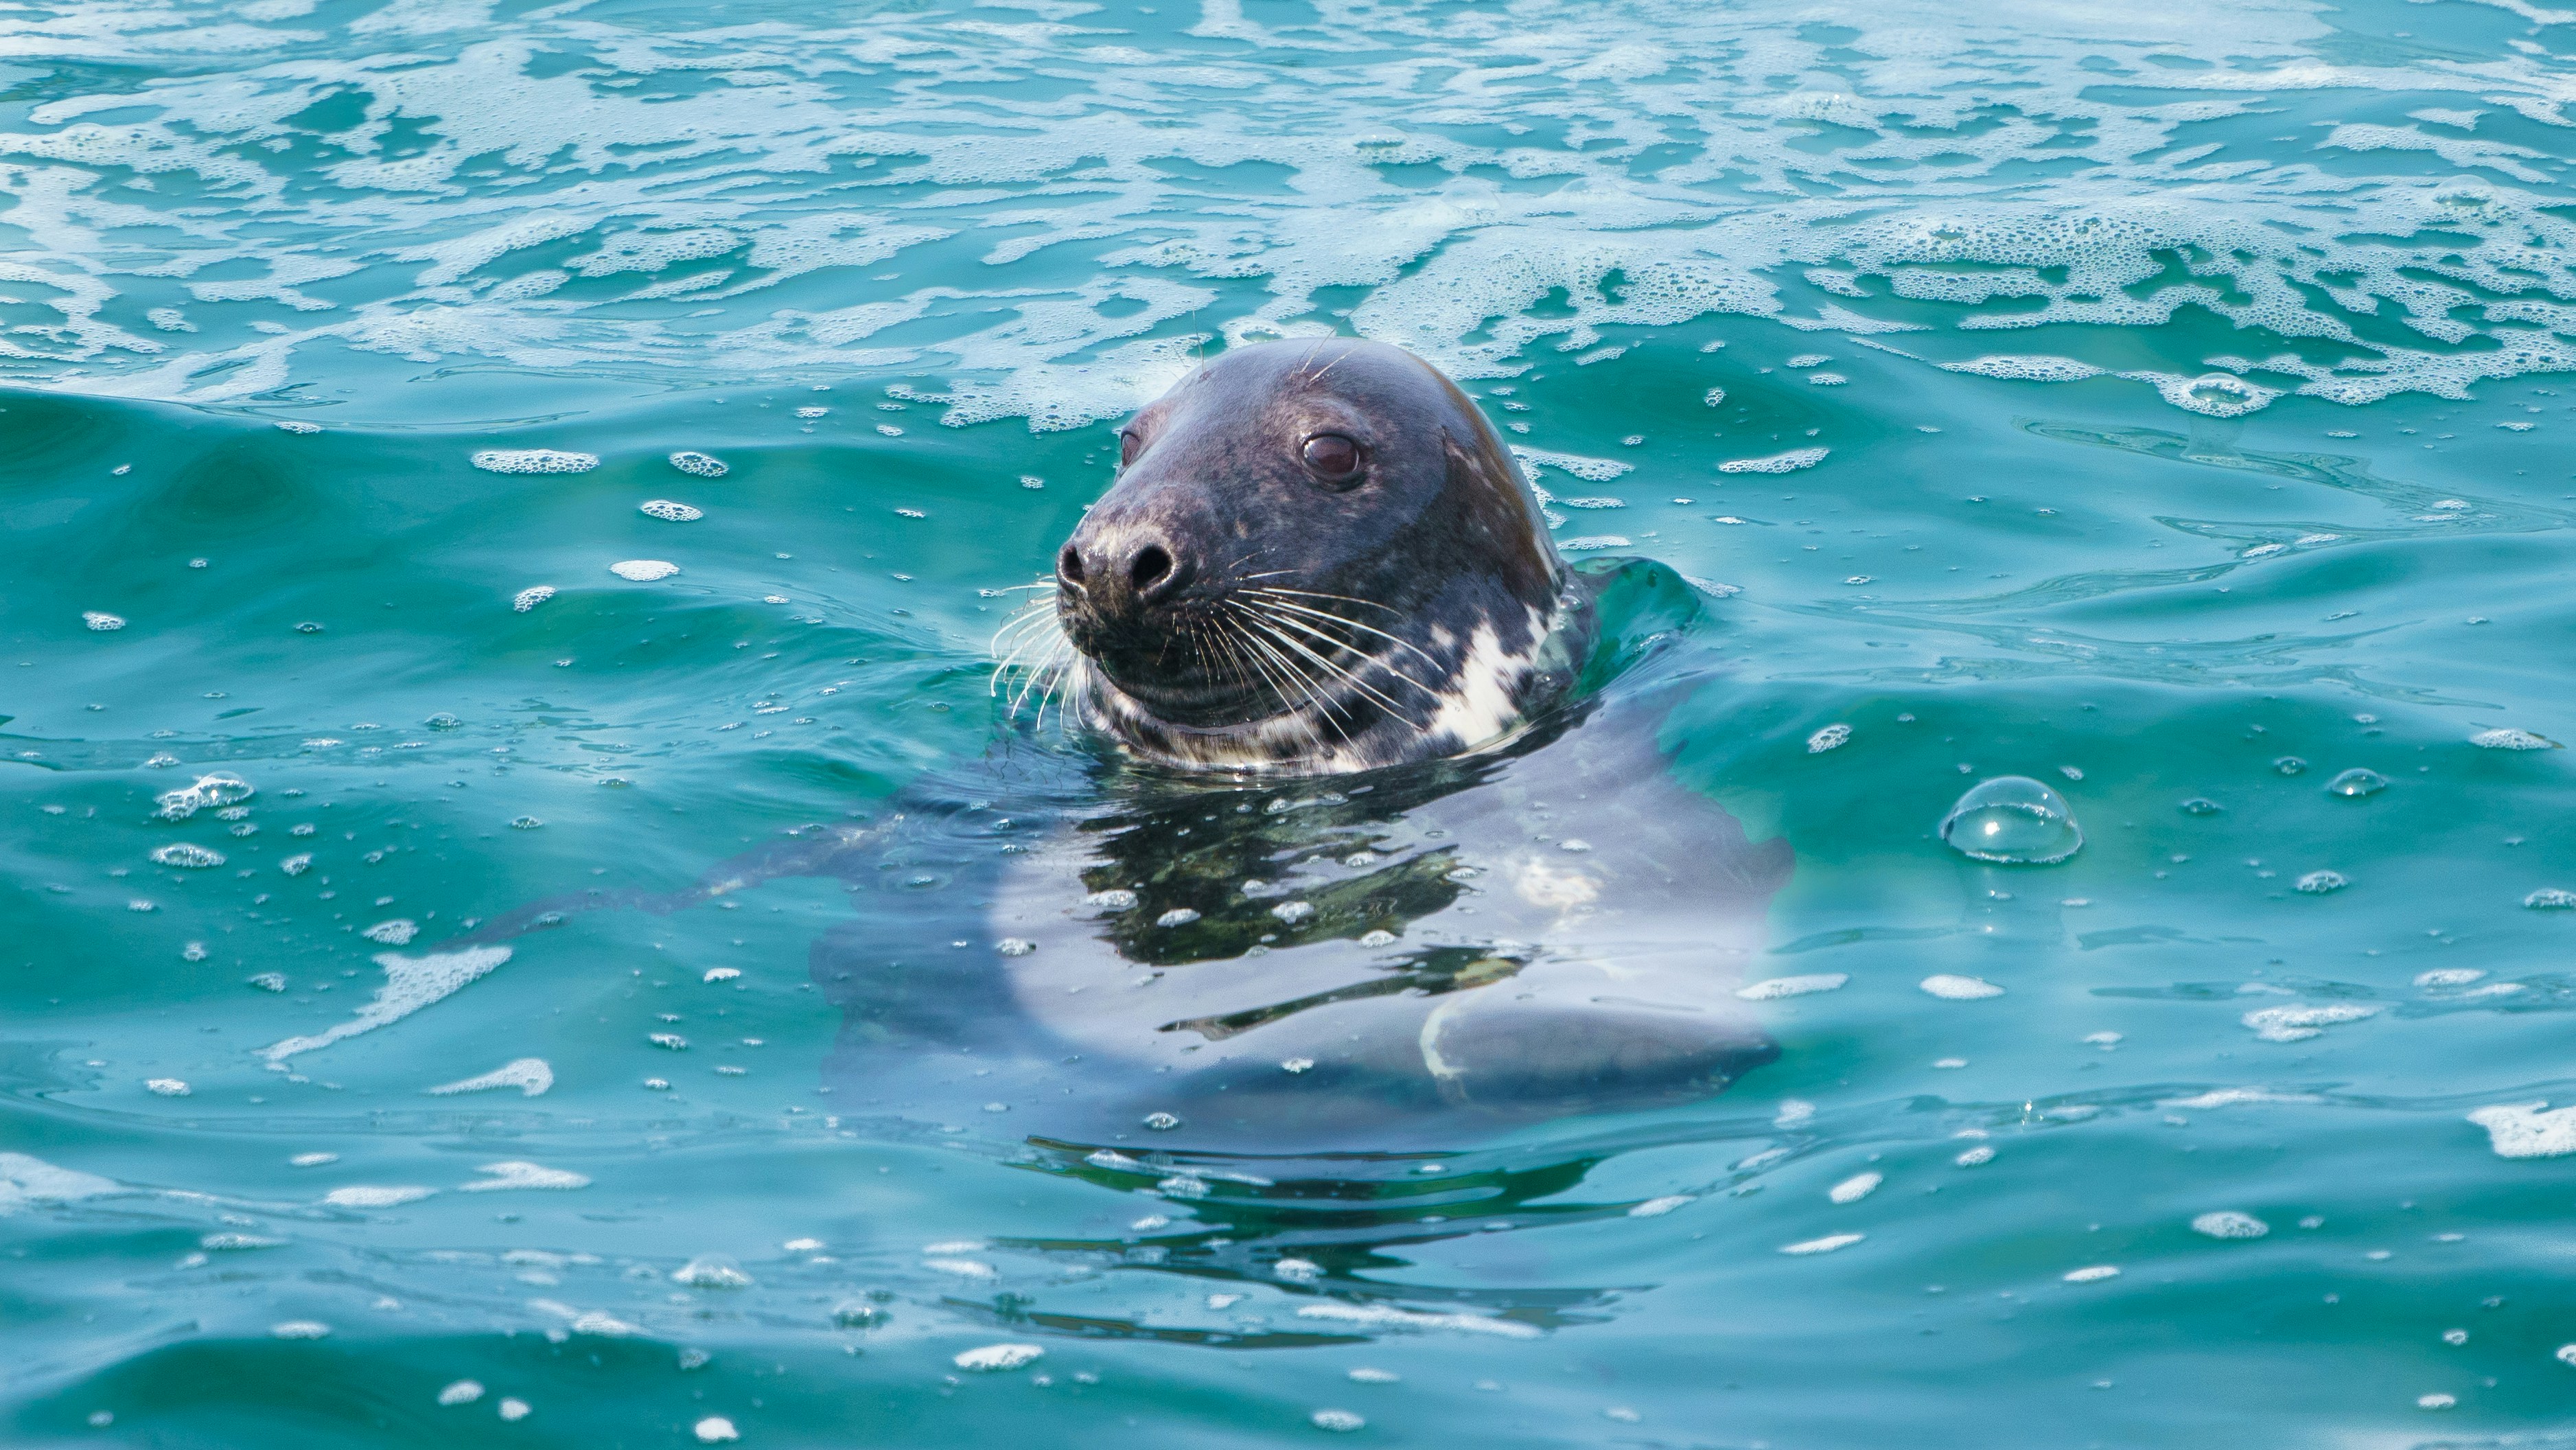 A seal is swimming in the ocean with only its head sticking out of the water